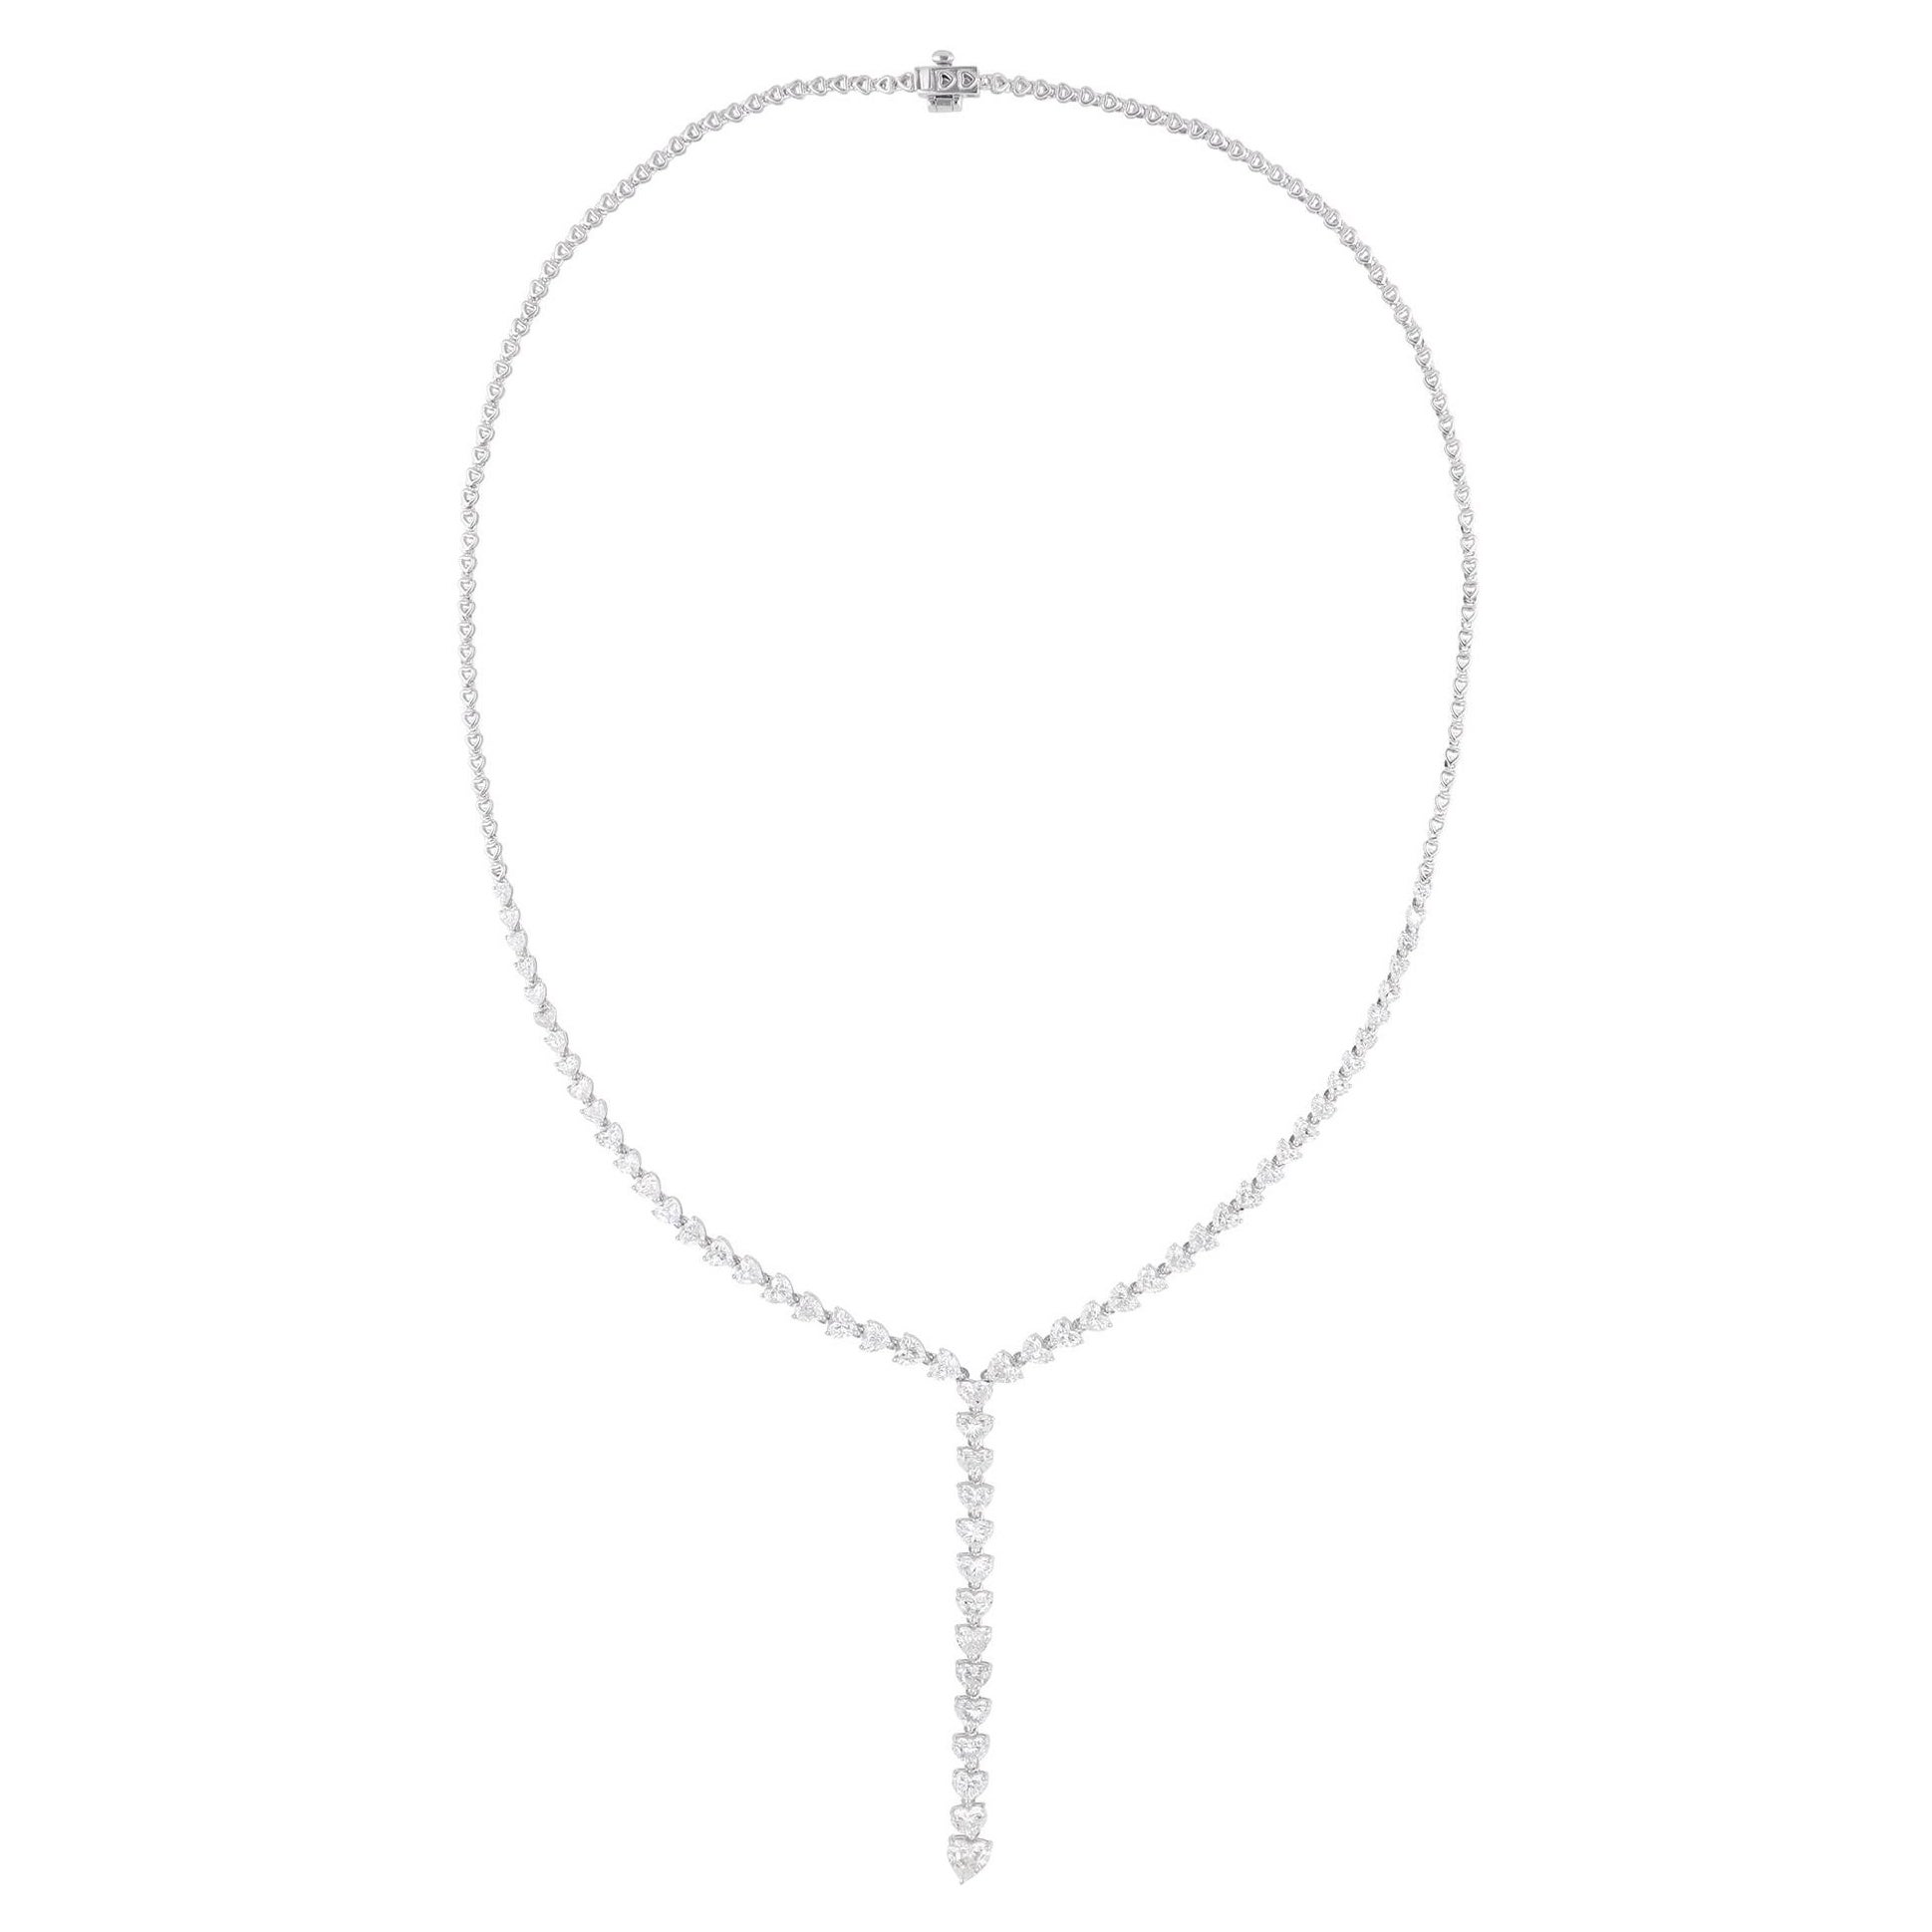 Real 6.84 Carat Heart Shape Diamond Lariat Necklace 18 Karat White Gold Jewelry For Sale